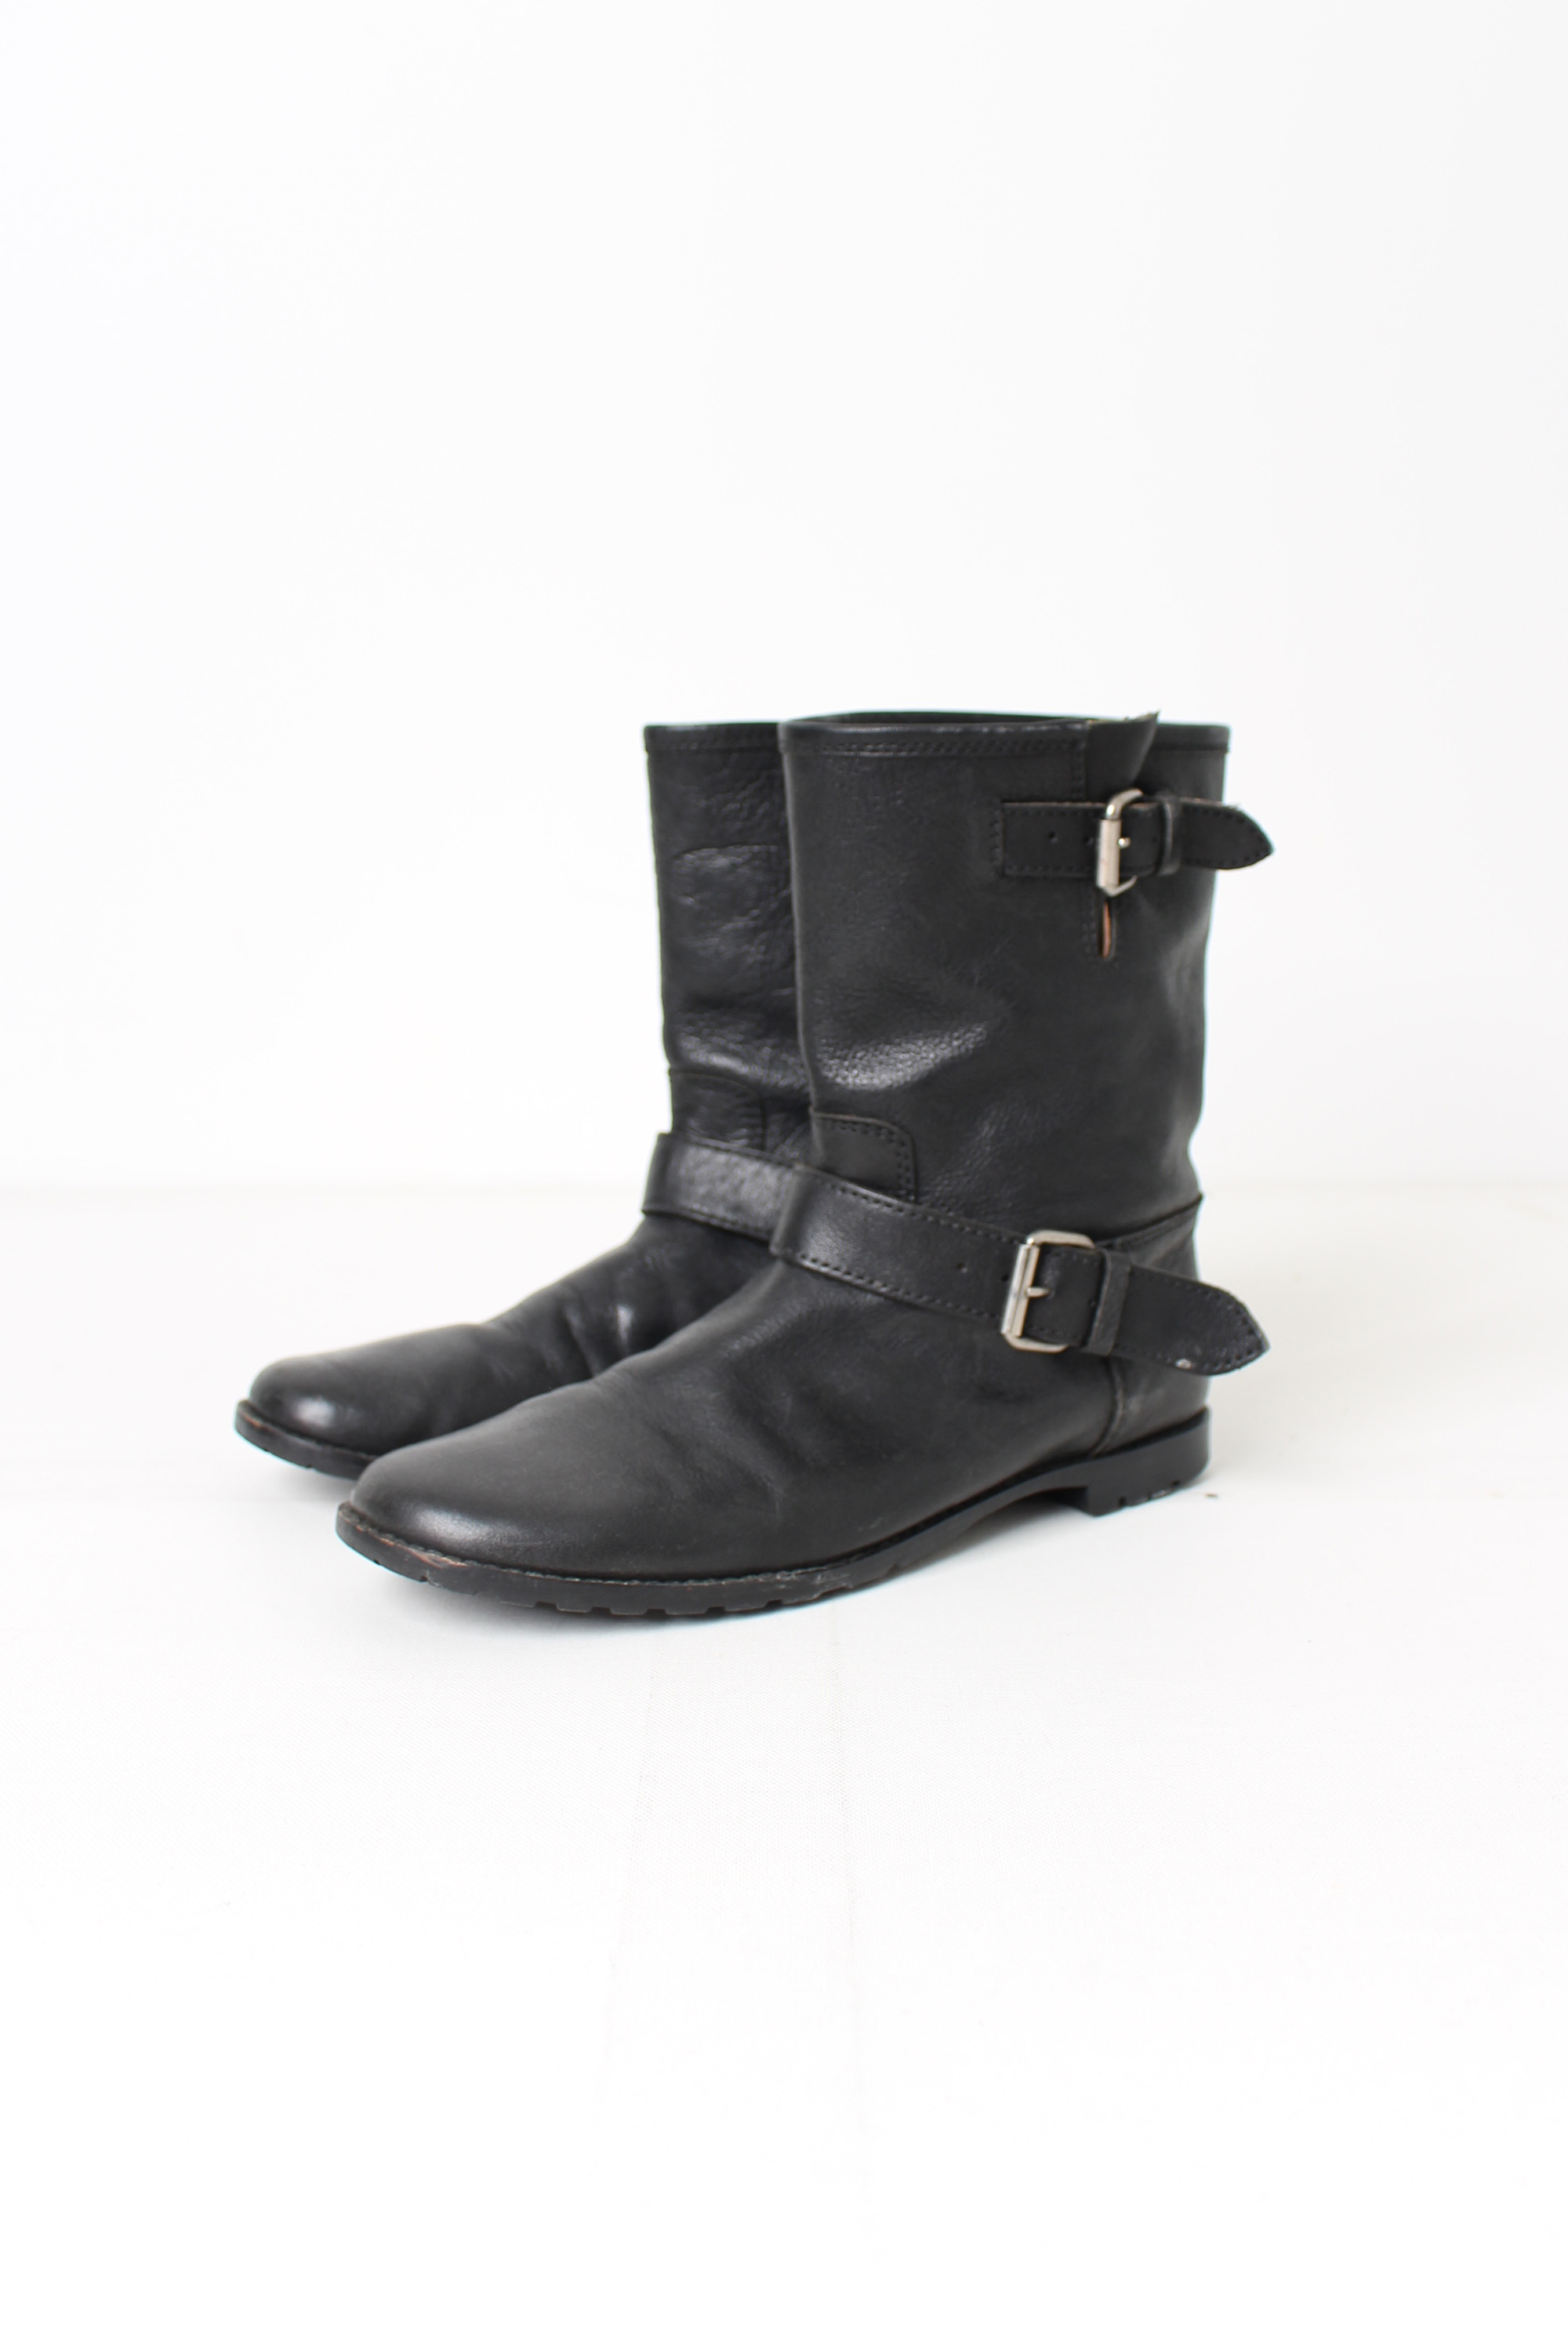 margaret howell ankle boots